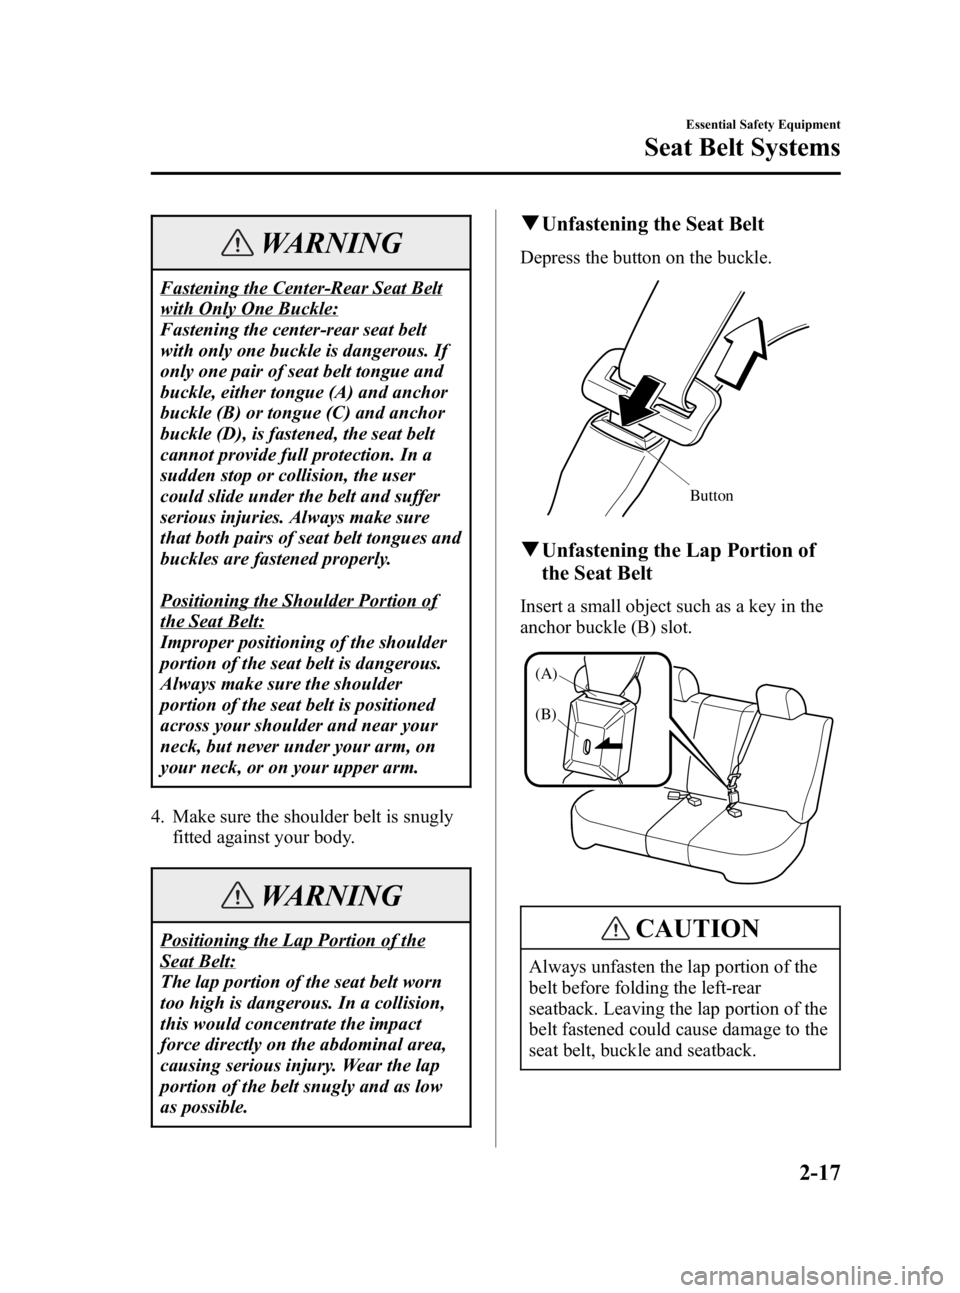 MAZDA MODEL 3 5-DOOR 2006 Owners Guide Black plate (31,1)
WARNING
Fastening the Center-Rear Seat Belt
with Only One Buckle:
Fastening the center-rear seat belt
with only one buckle is dangerous. If
only one pair of seat belt tongue and
buc